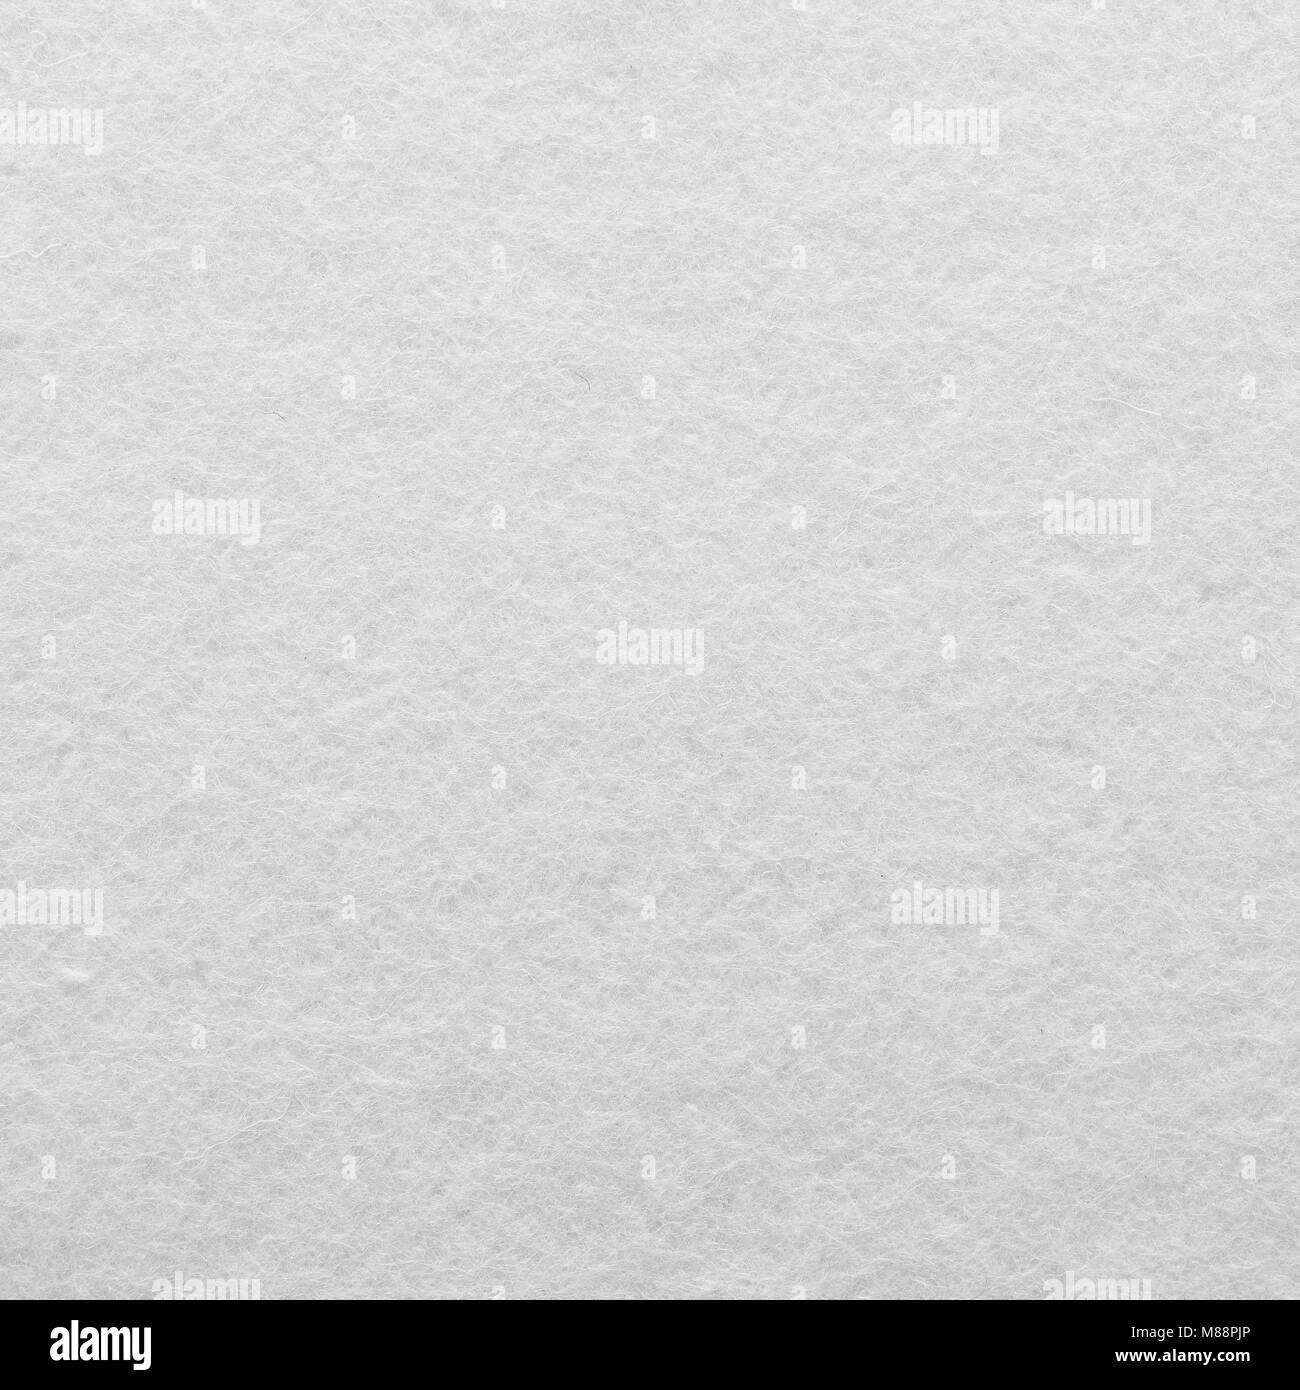 White felt fabric texture to be used as a neutral background Stock